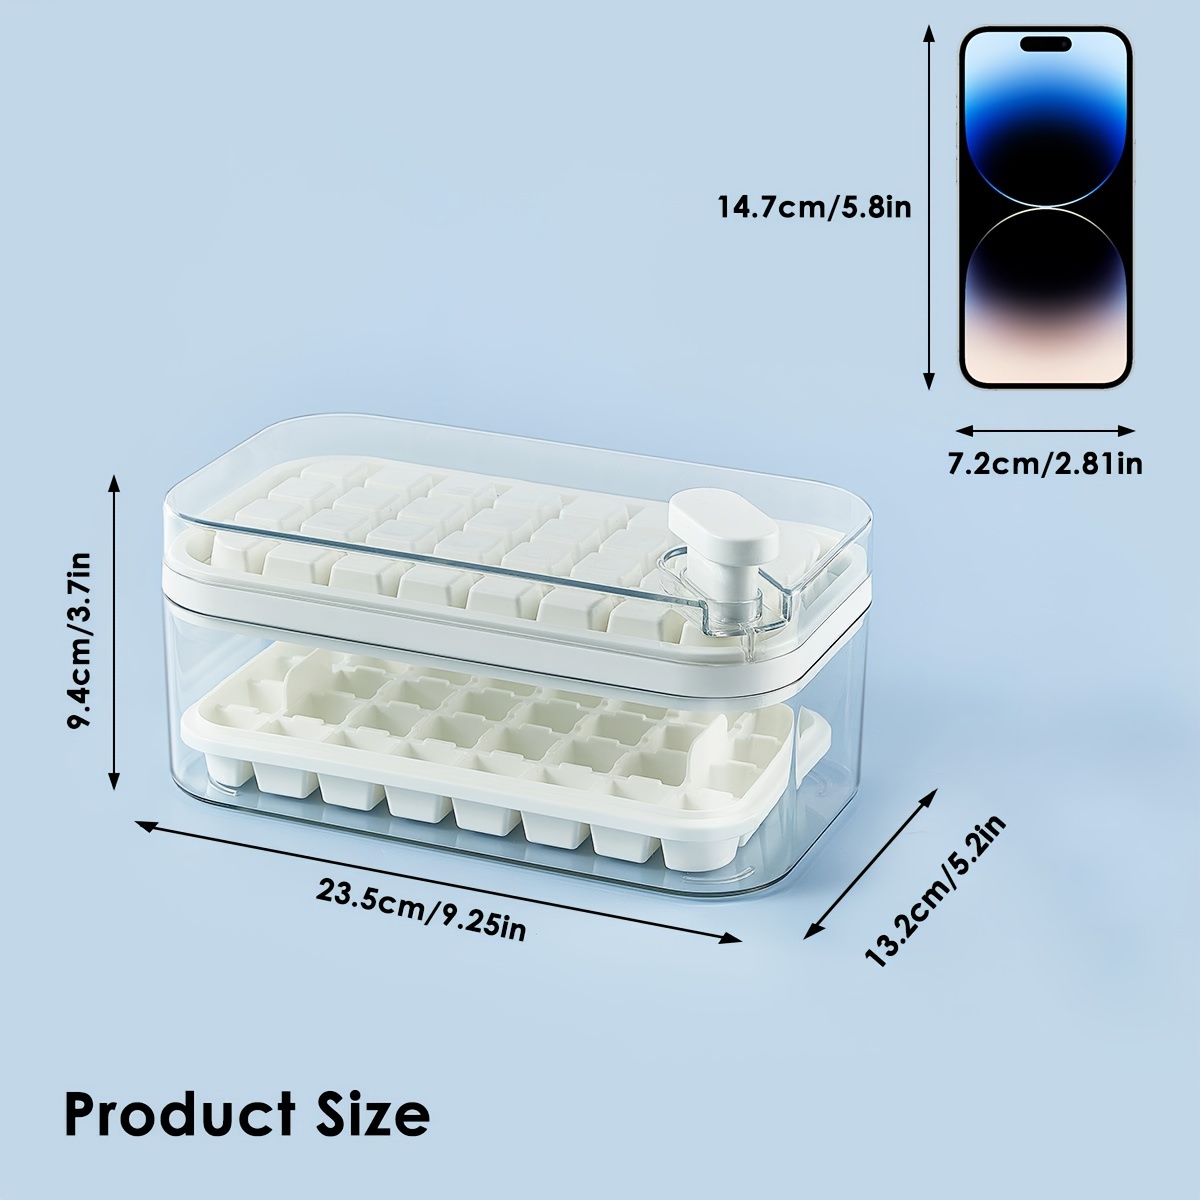 Ice Cube Trays With Lids & Bins - 64 Cubes Per Tray - Freezer Safe